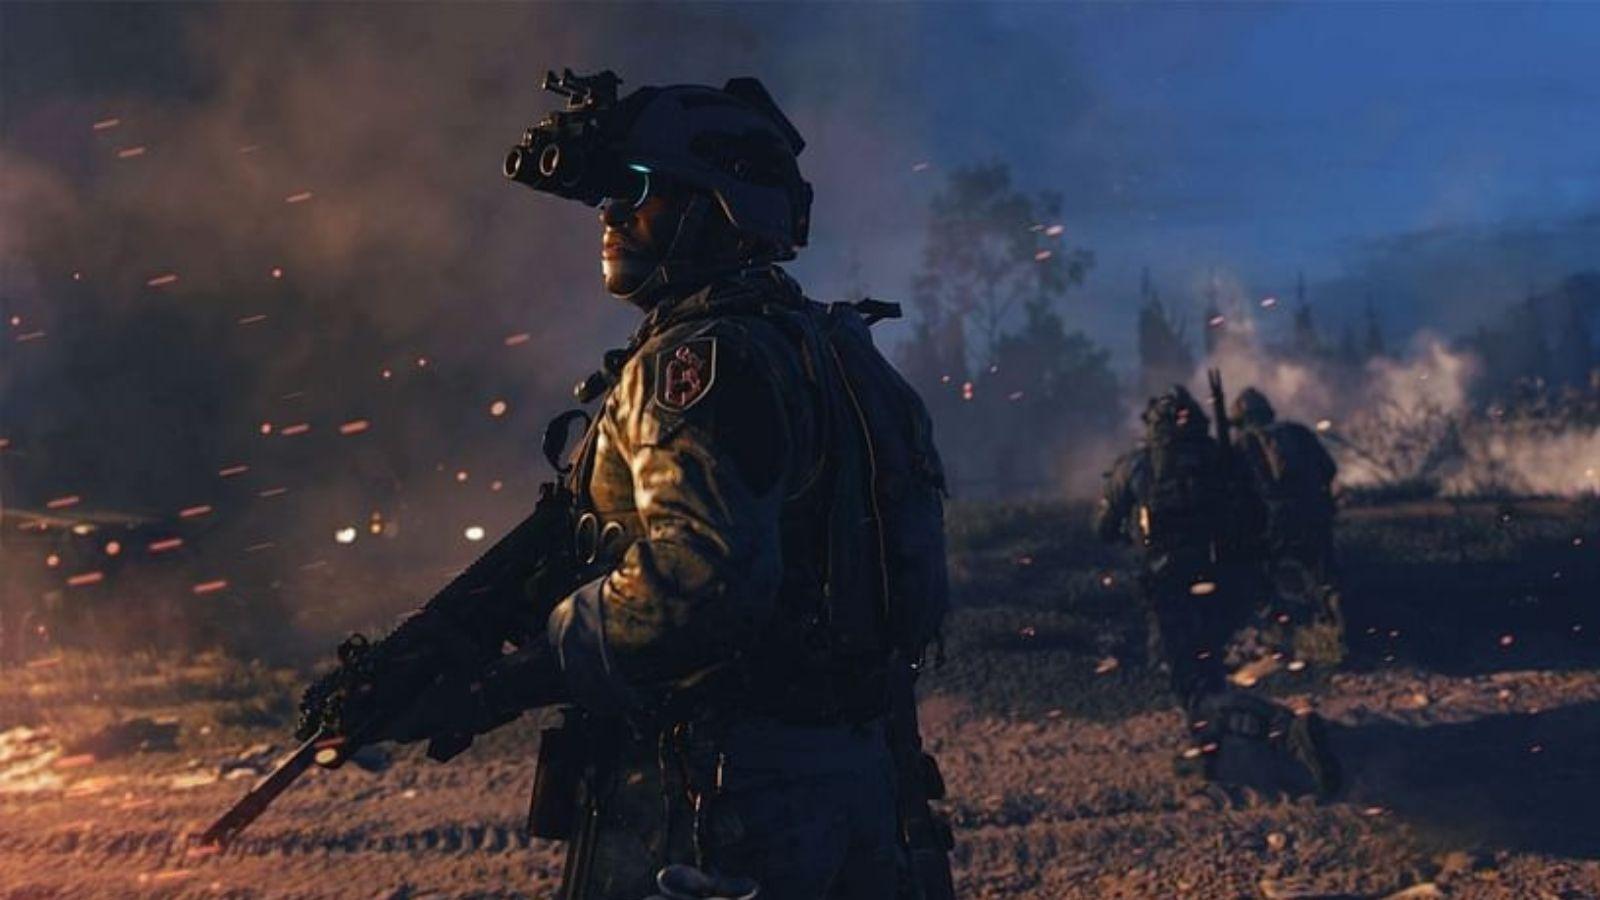 Call of Duty files hint at Modern Warfare 3 live reveal event in Warzone 2